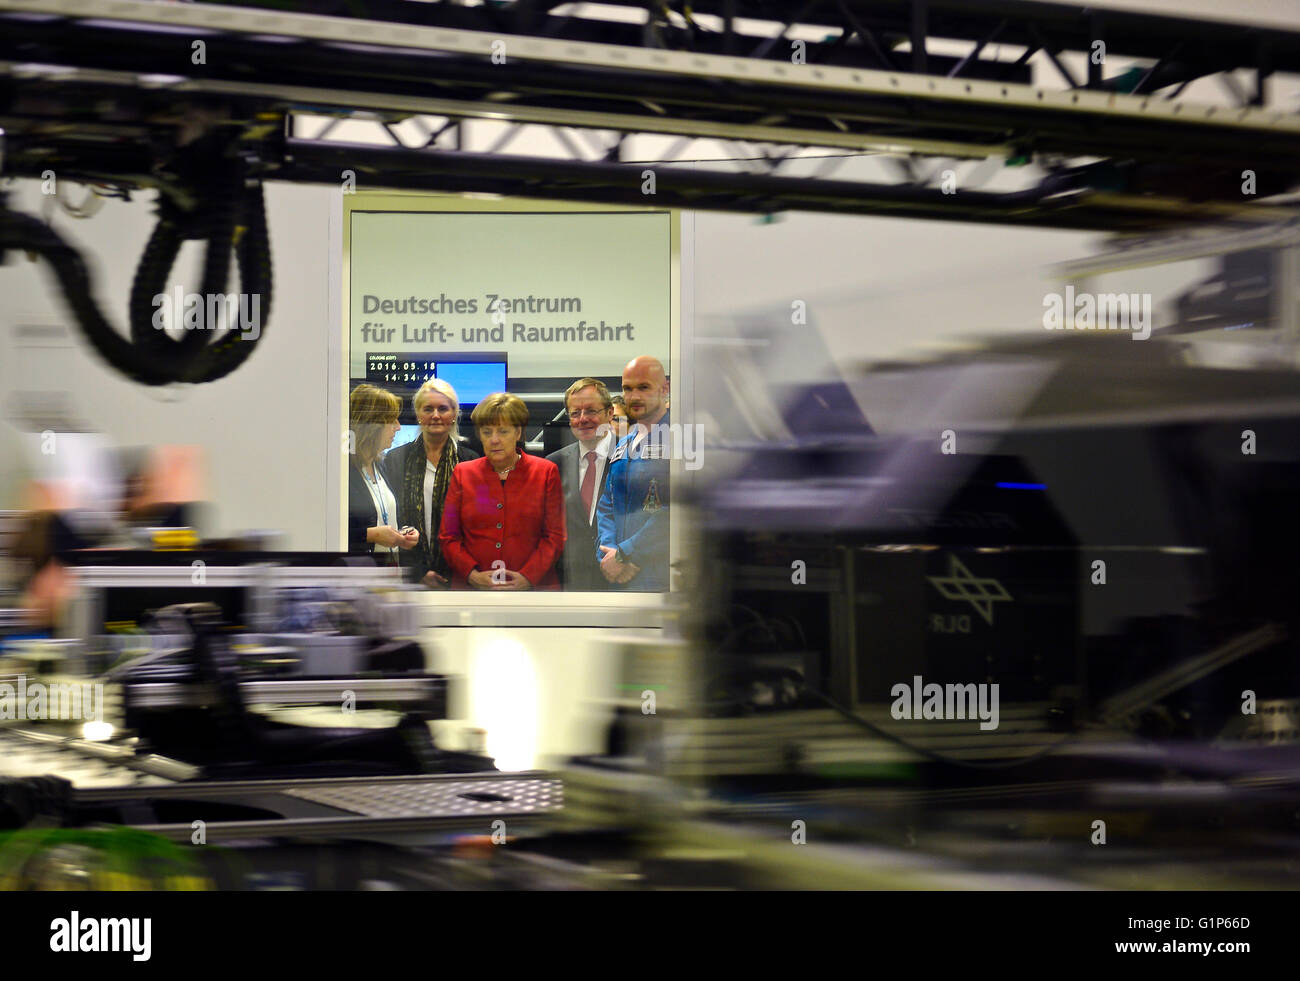 Cologne, Germany. 18th May, 2016. Head of the Gravitational Biology Section Ruth Hemmersbach (L-R), DLR CEO Pascale Ehrenfreundhe, ESA president Johann-Dietrich Woerner, German Chancellor Angela Merkel and the German astronaut Alexander Gerst view a moving centrifuge in the DLR-Laboratory for Life Science Experiments during a visit to the European Astronaut Centre (EAC) in Cologne, Germany, on May 18, 2016. Photo: Sascha Schuermann/dpa/Alamy Live News Stock Photo